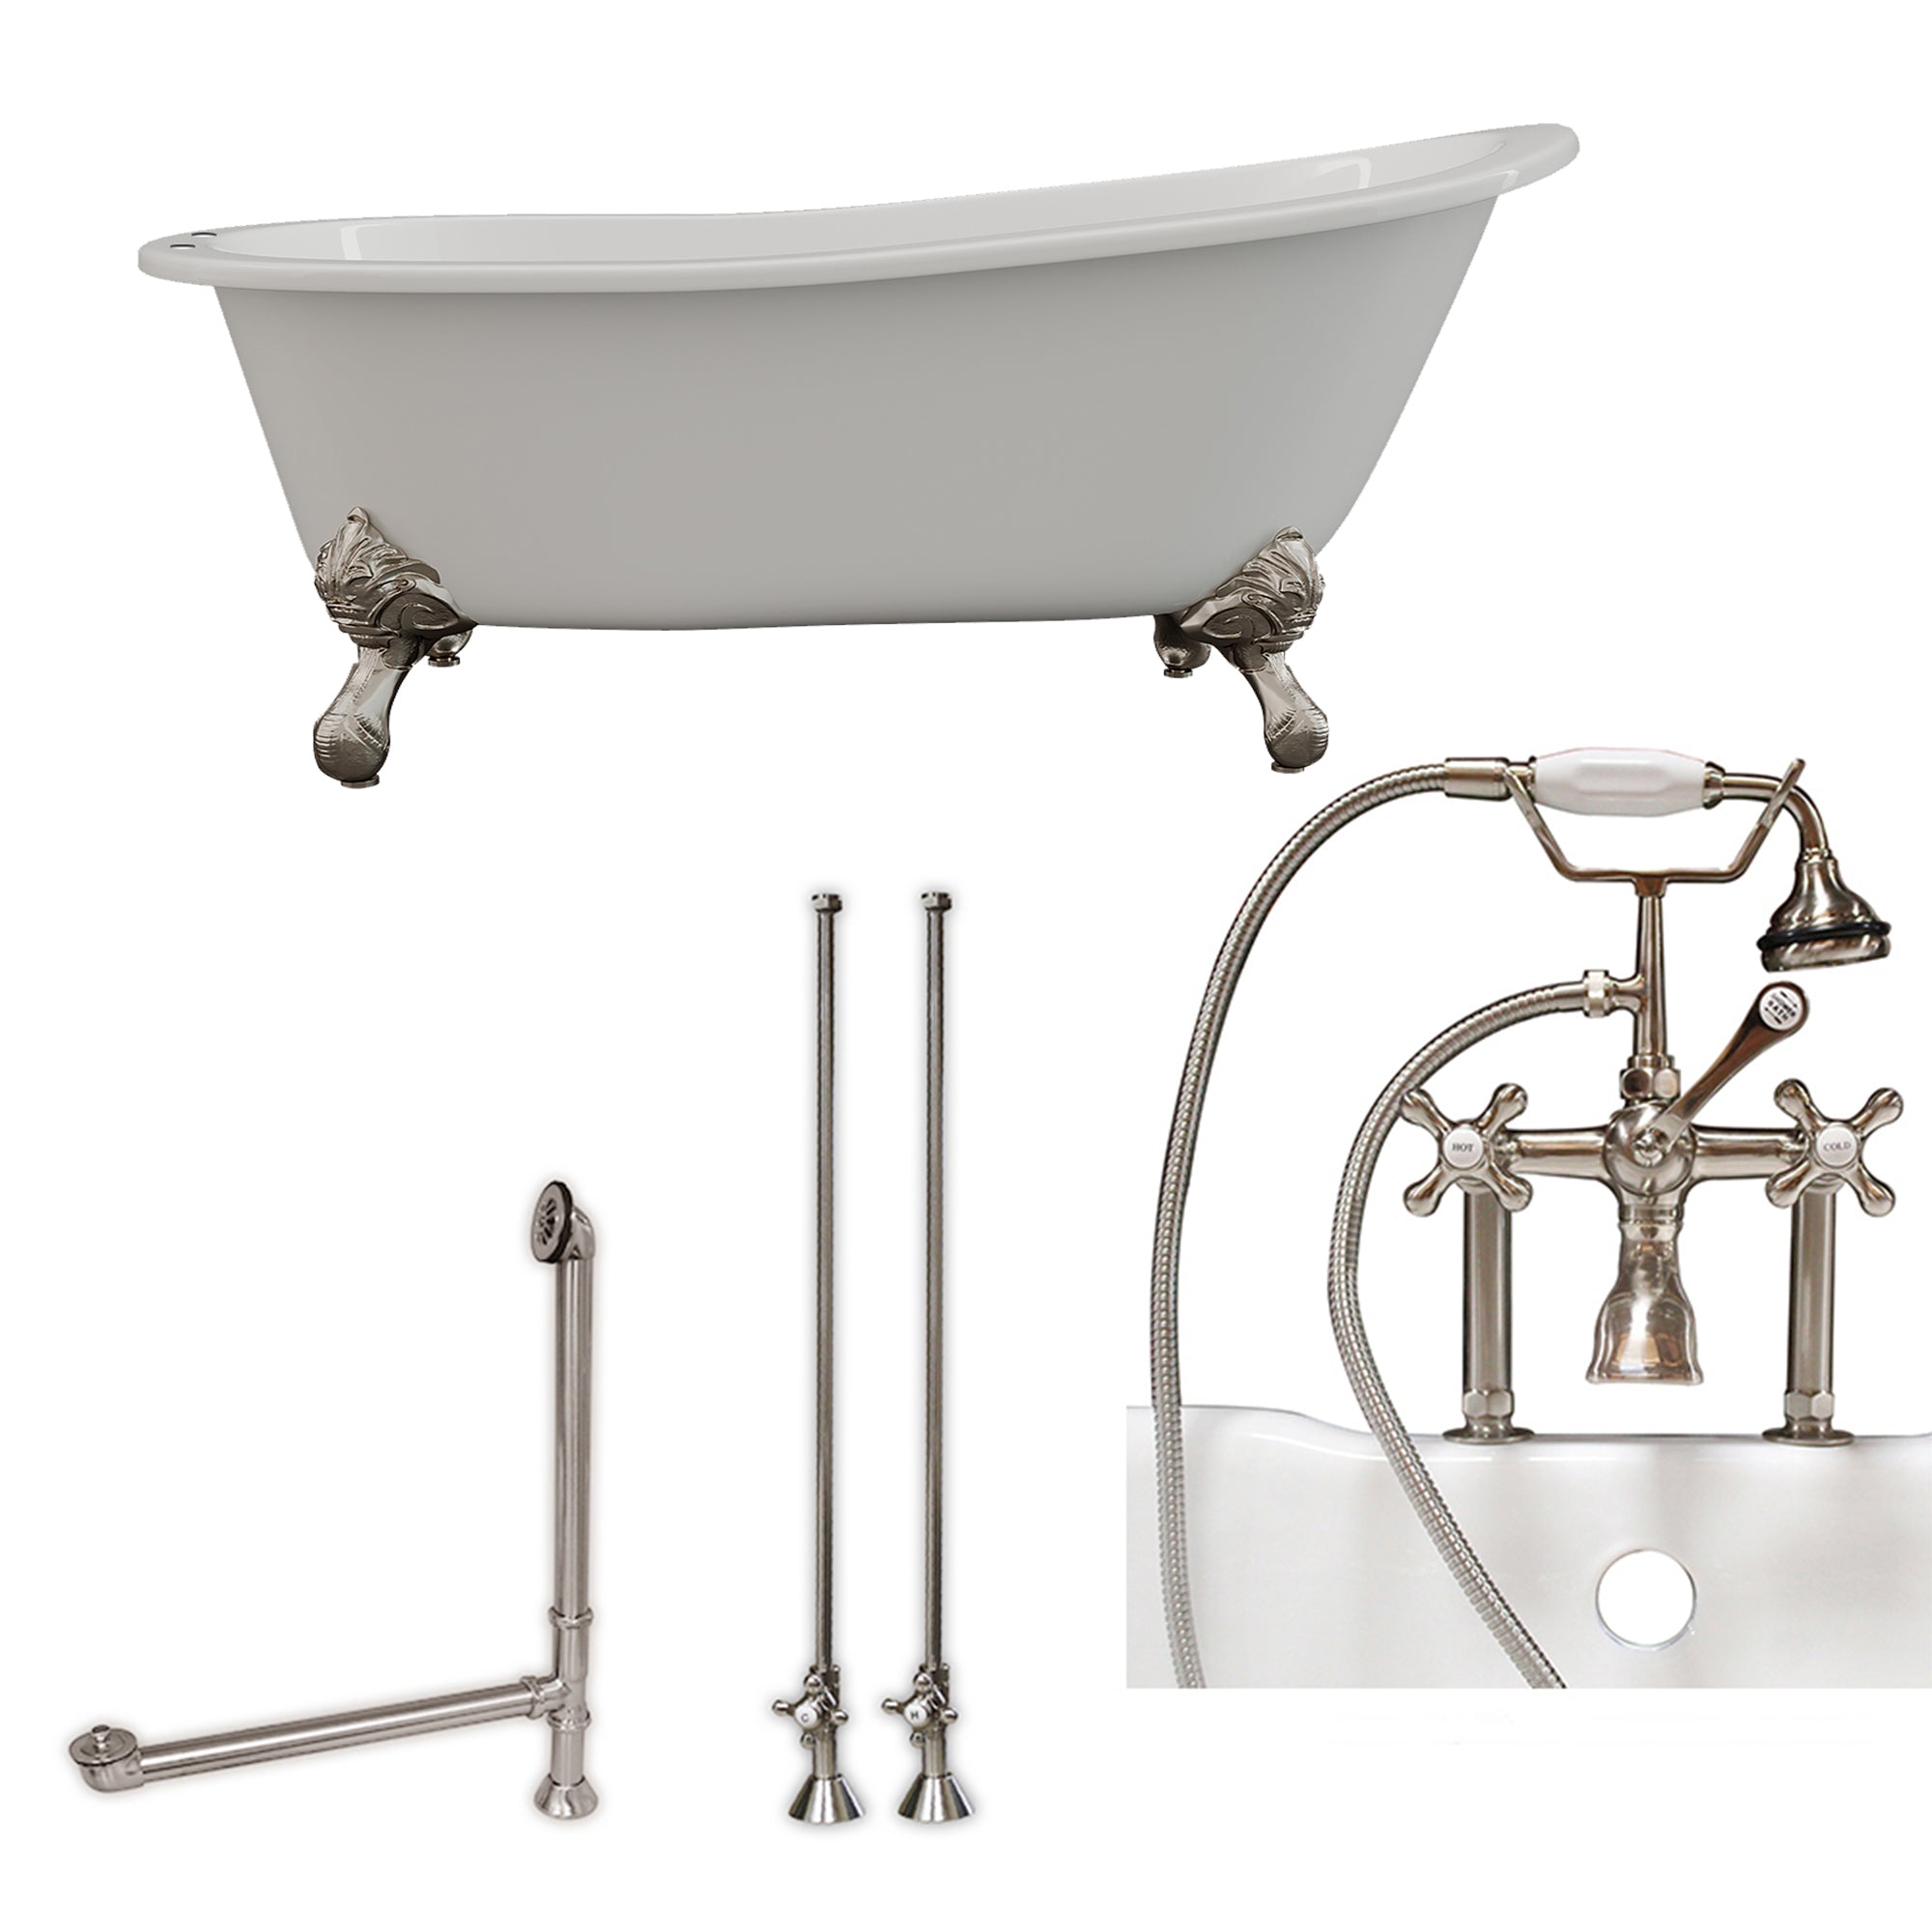 Cambridge Plumbing 67-Inch Slipper Cast Iron Clawfoot Tub (Porcelain enamel interior and white paint exterior) and Deck Mount Plumbing Package (Brushed Nickel) ST67-463D-6-PKG-7DH - Vital Hydrotherapy